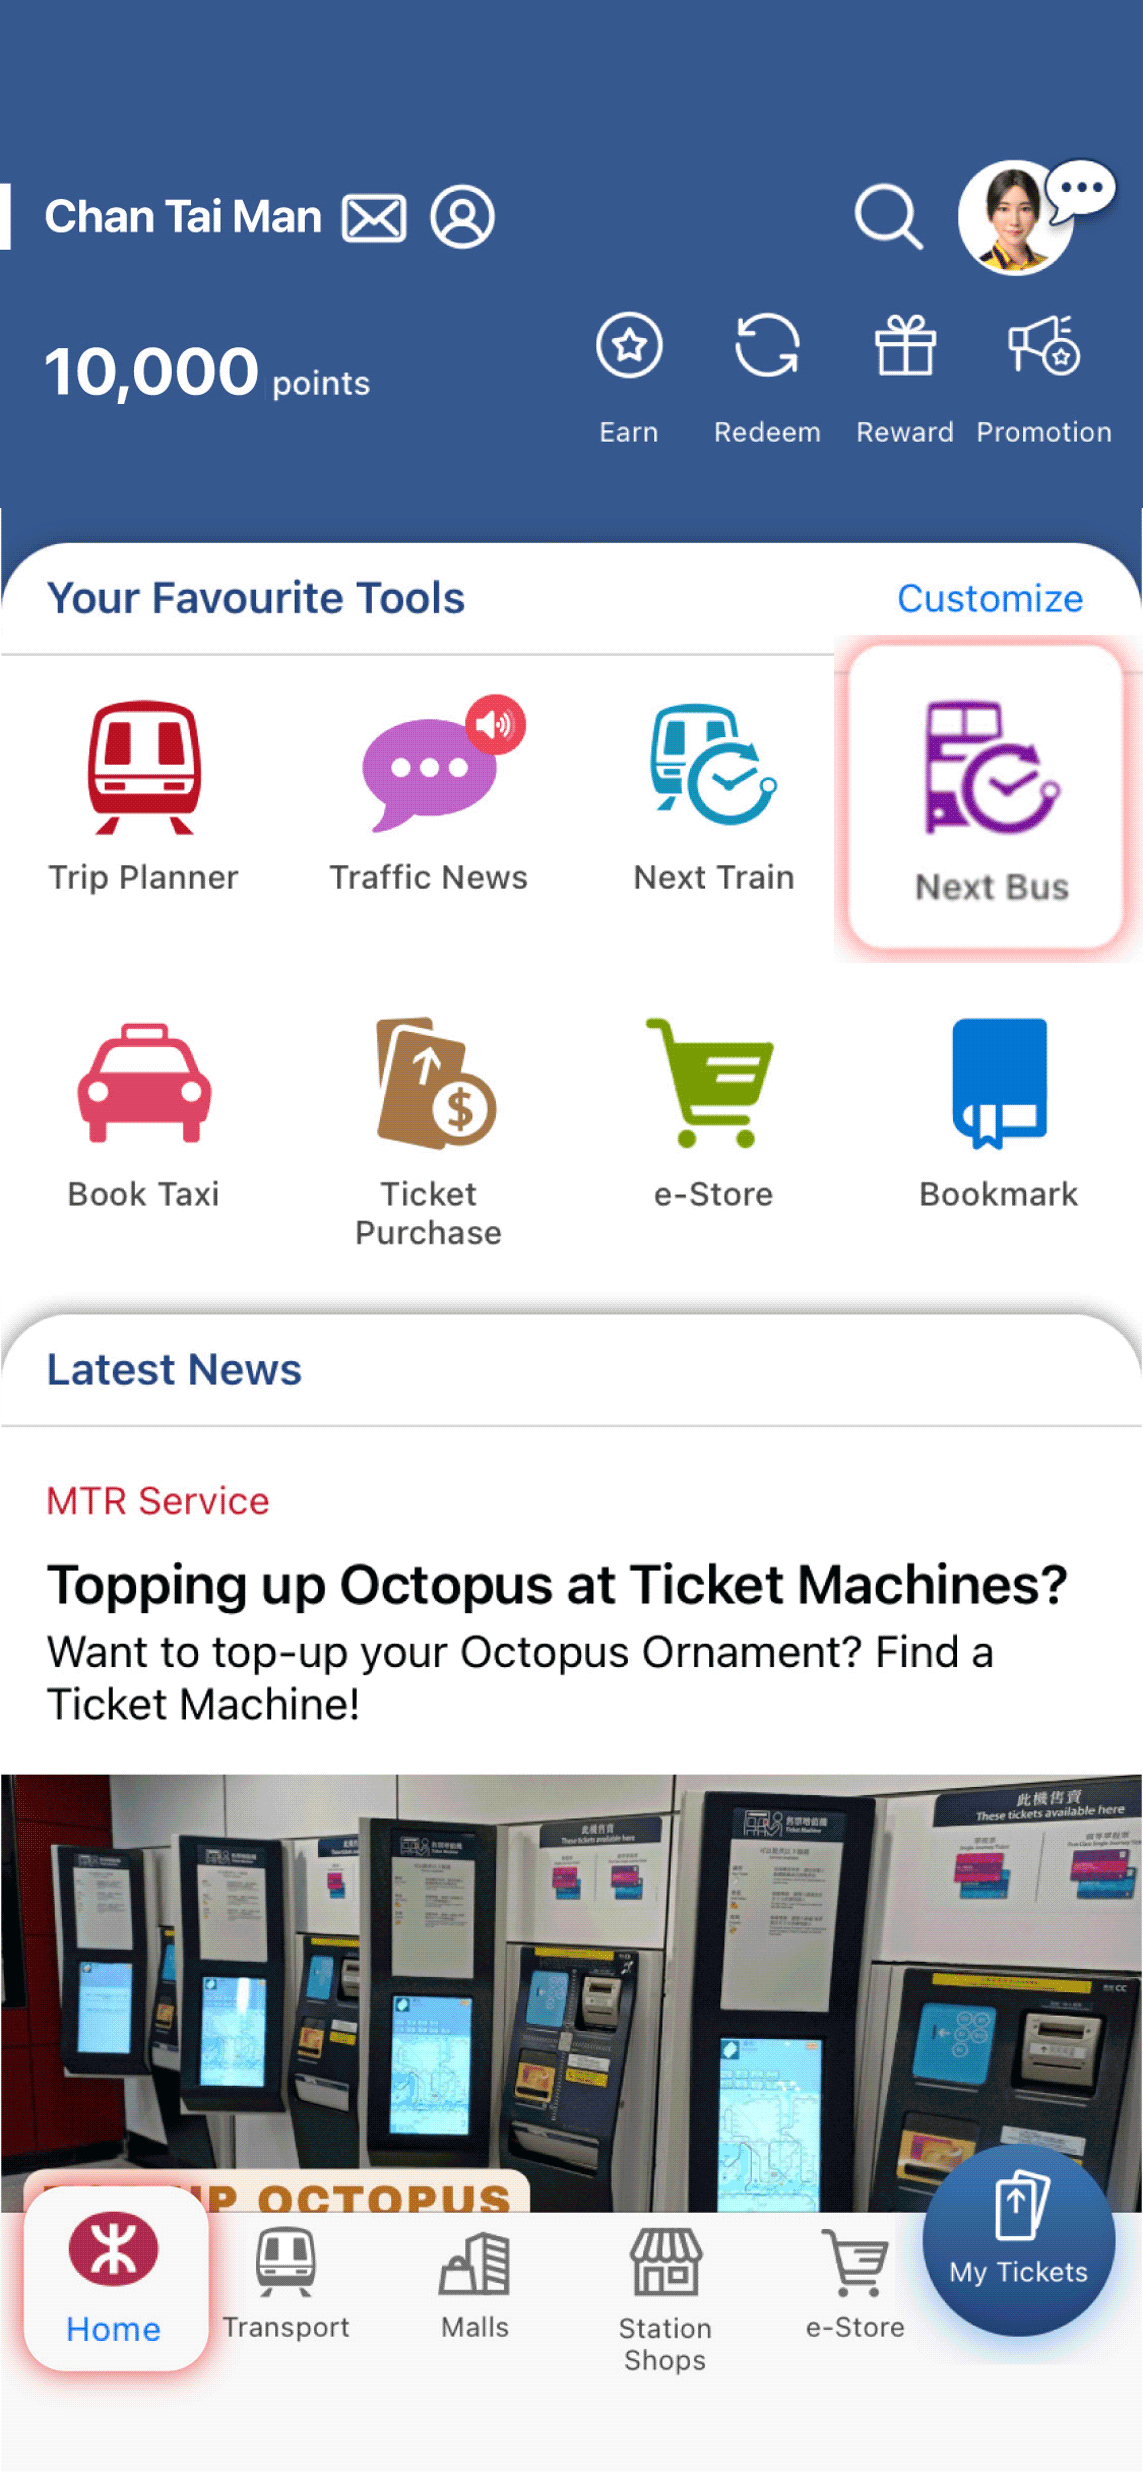 Tap the 'Next Bus' icon on the MTR Mobile 'Homepage' or 'Transport' to access the function